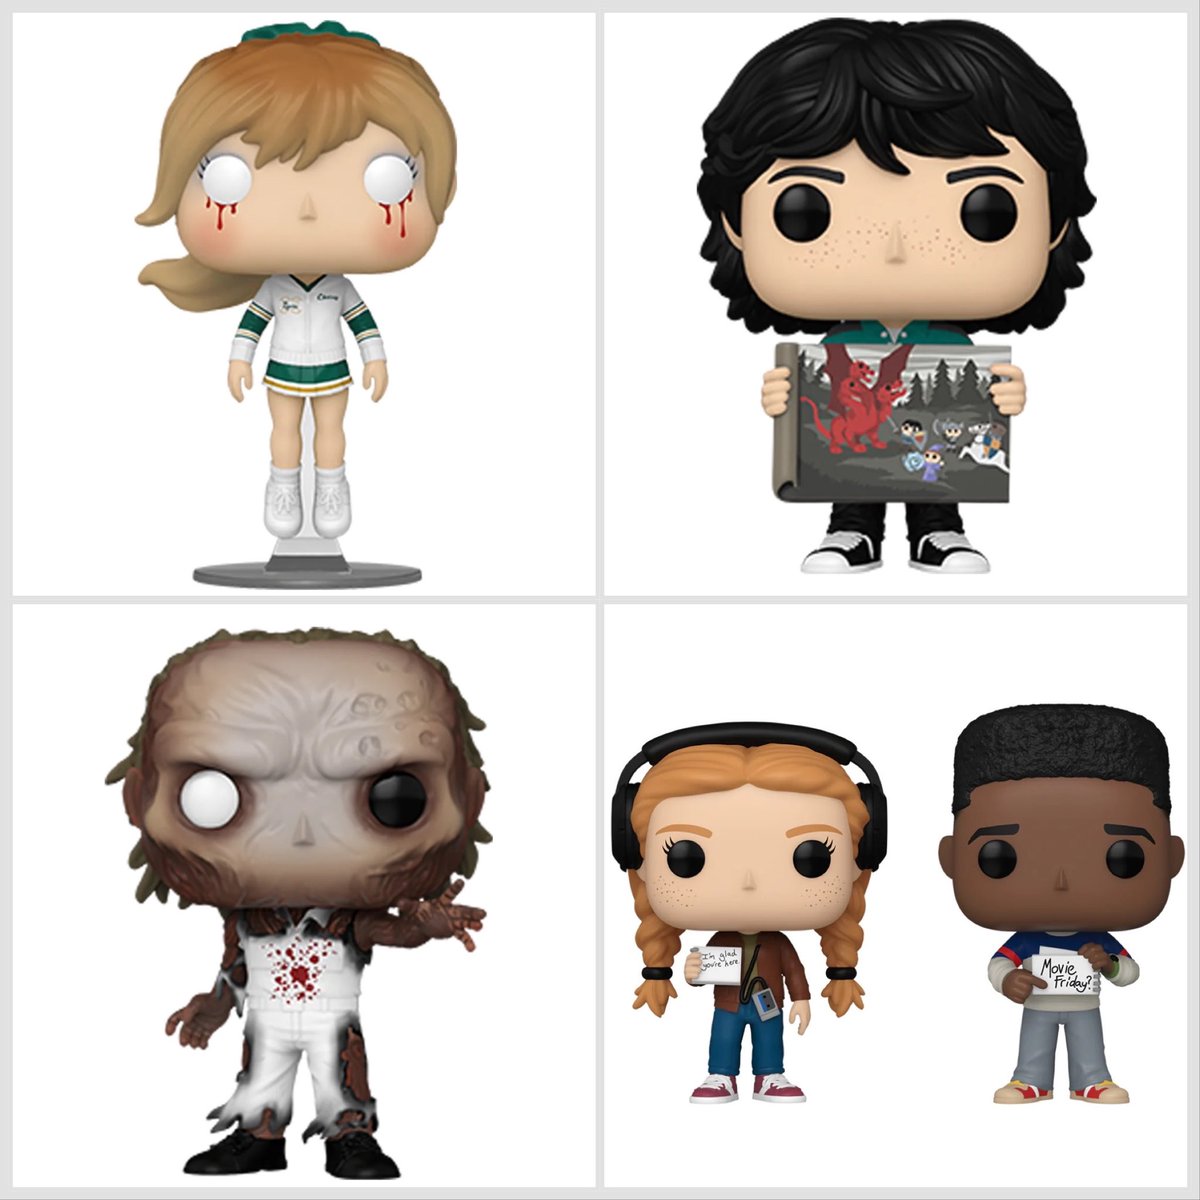 Better looks at the New Stranger Thing's Funko Pops! Repost @DisTrackers - #funko #funkopop #funkopopcollection #funkoaddict #funkopops #funkocollector #anime #manga #funkofamily #skittlerampage #strangerthings #vecna